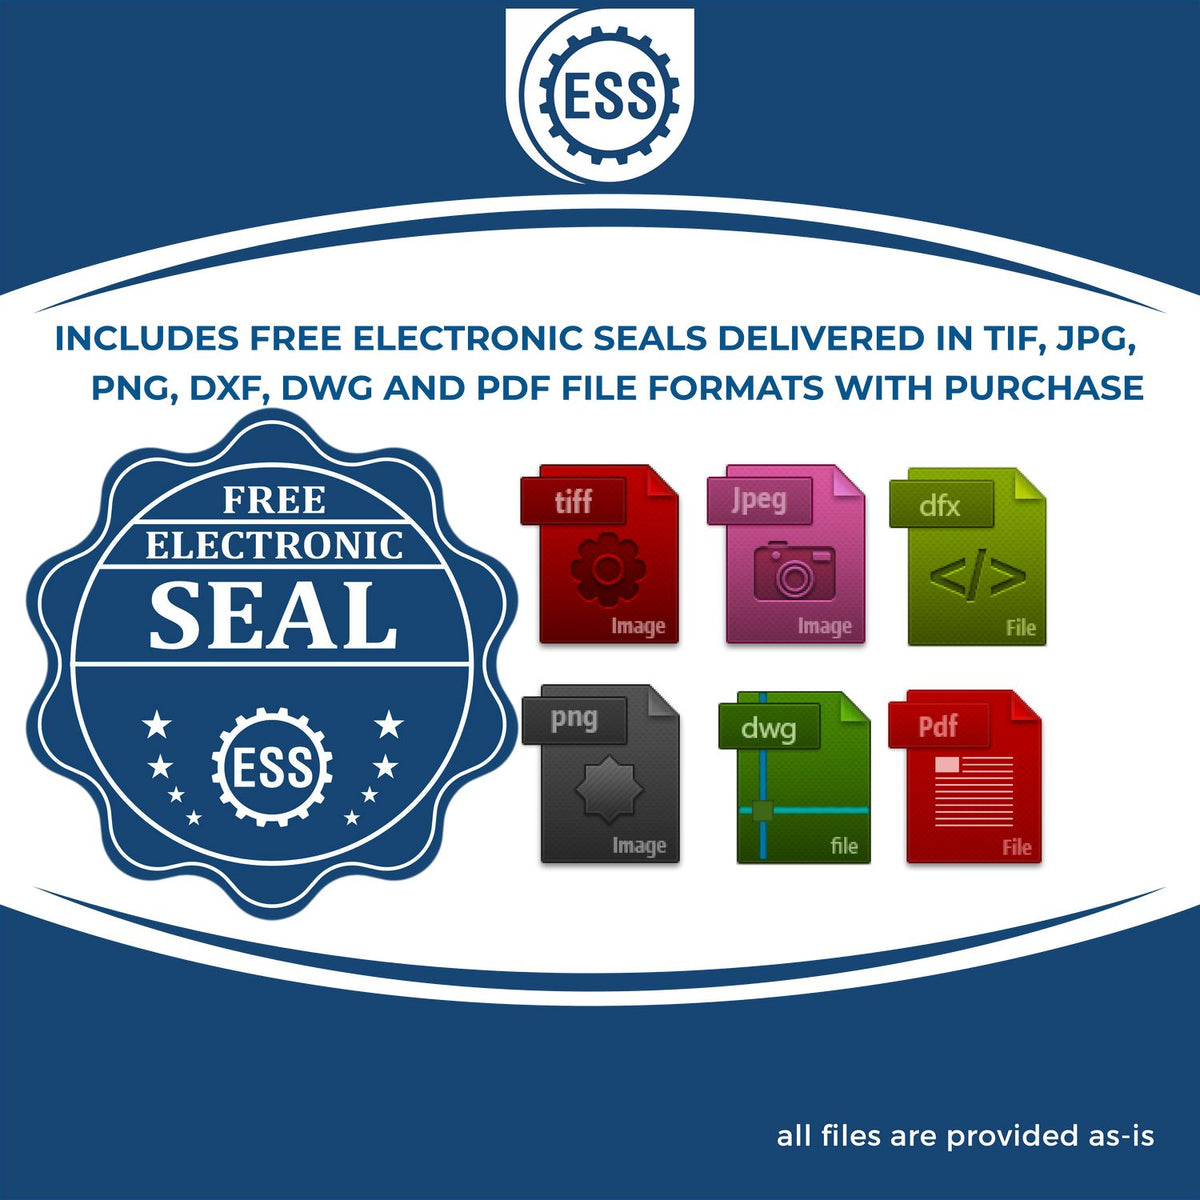 An infographic for the free electronic seal for the State of Utah Extended Long Reach Geologist Seal illustrating the different file type icons such as DXF, DWG, TIF, JPG and PNG.